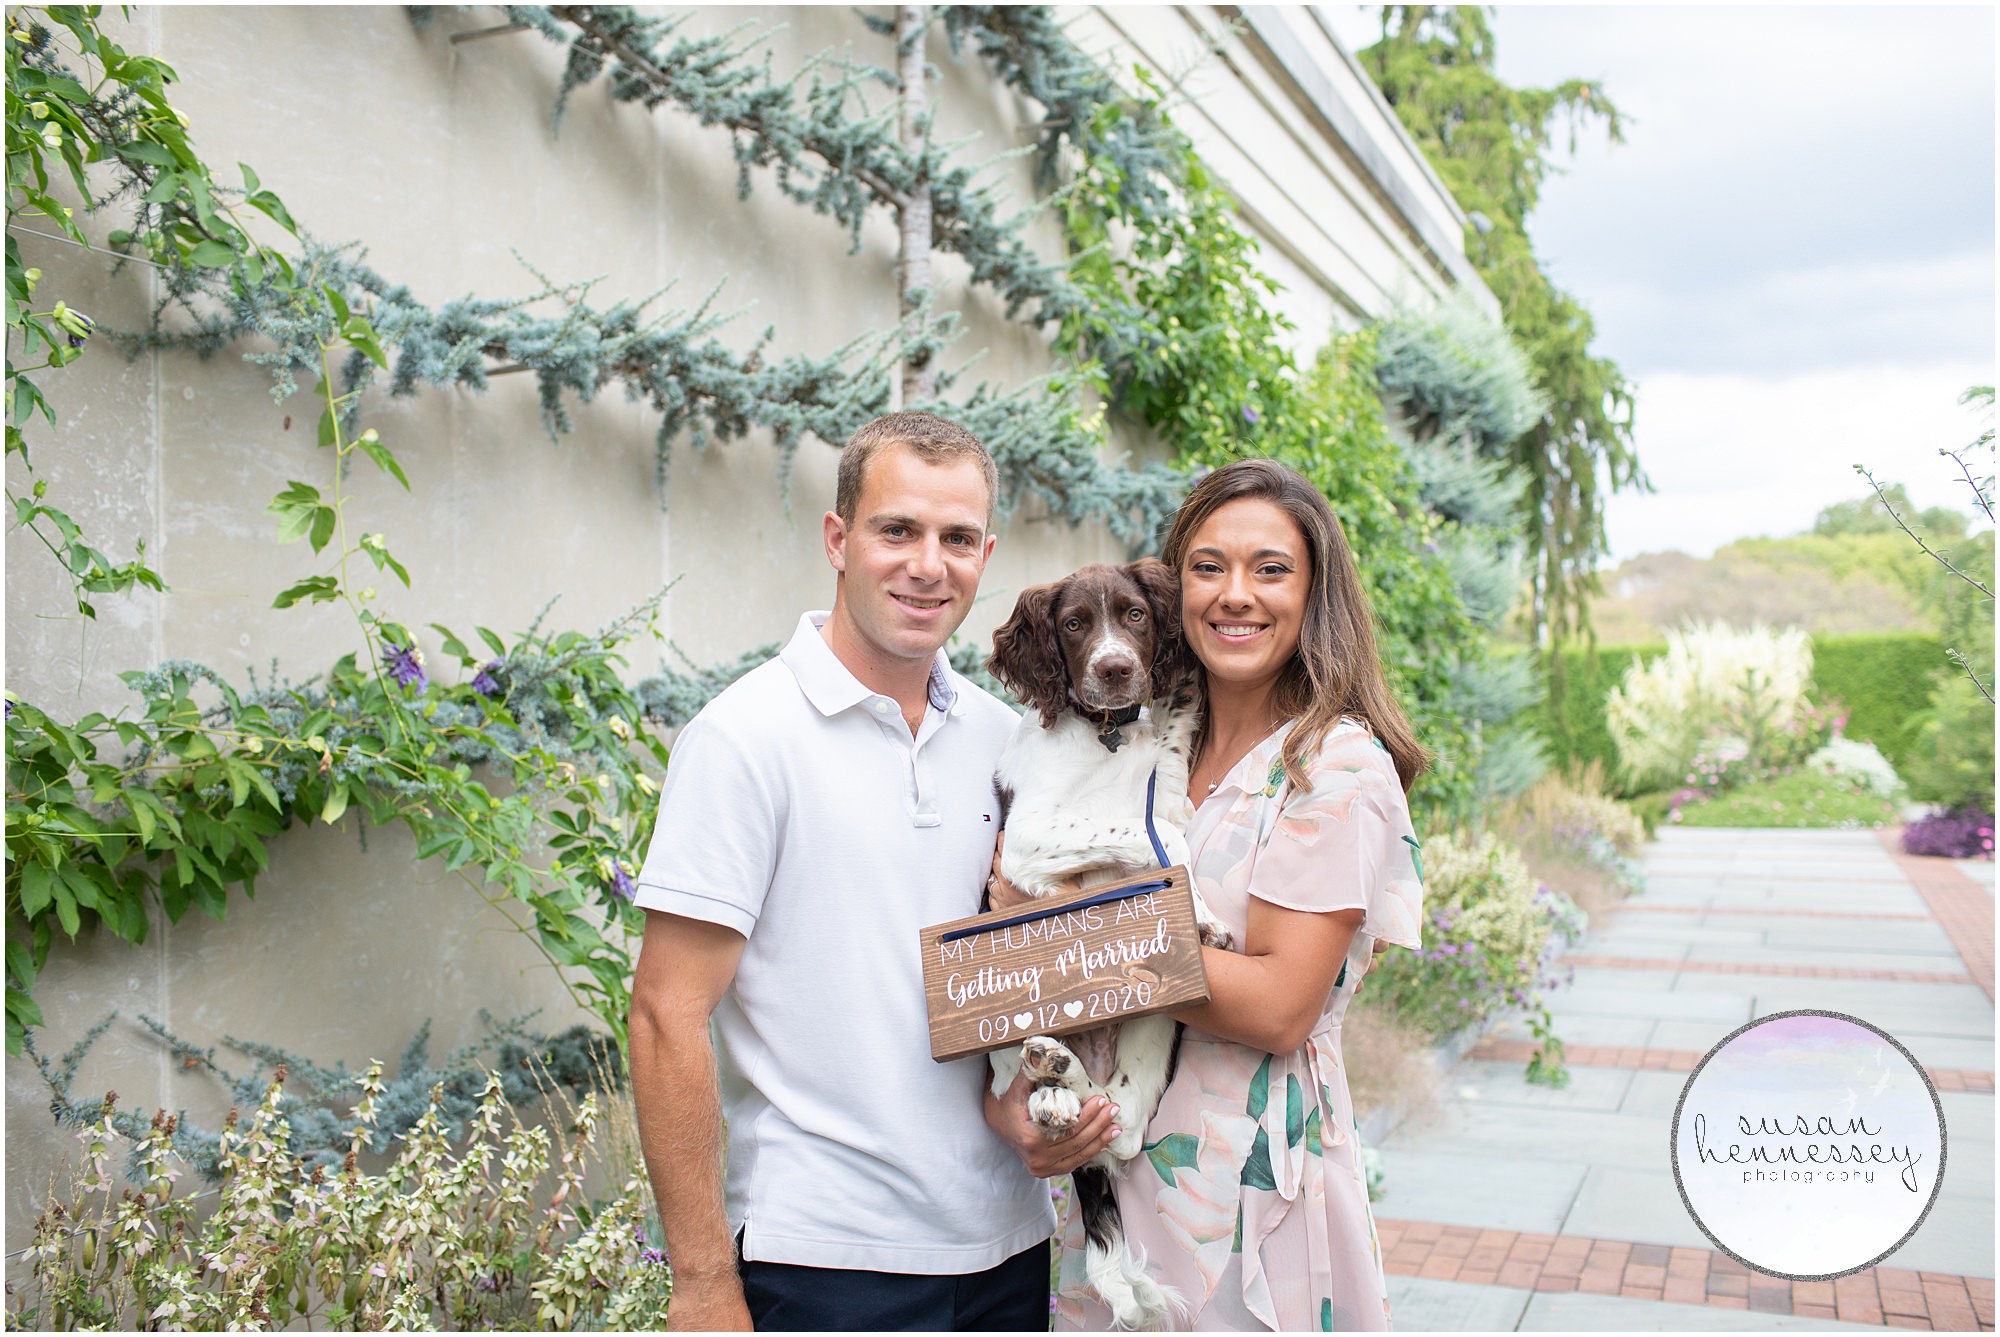 An engaged couple pose with their dog at their Philadelphia engagement session.